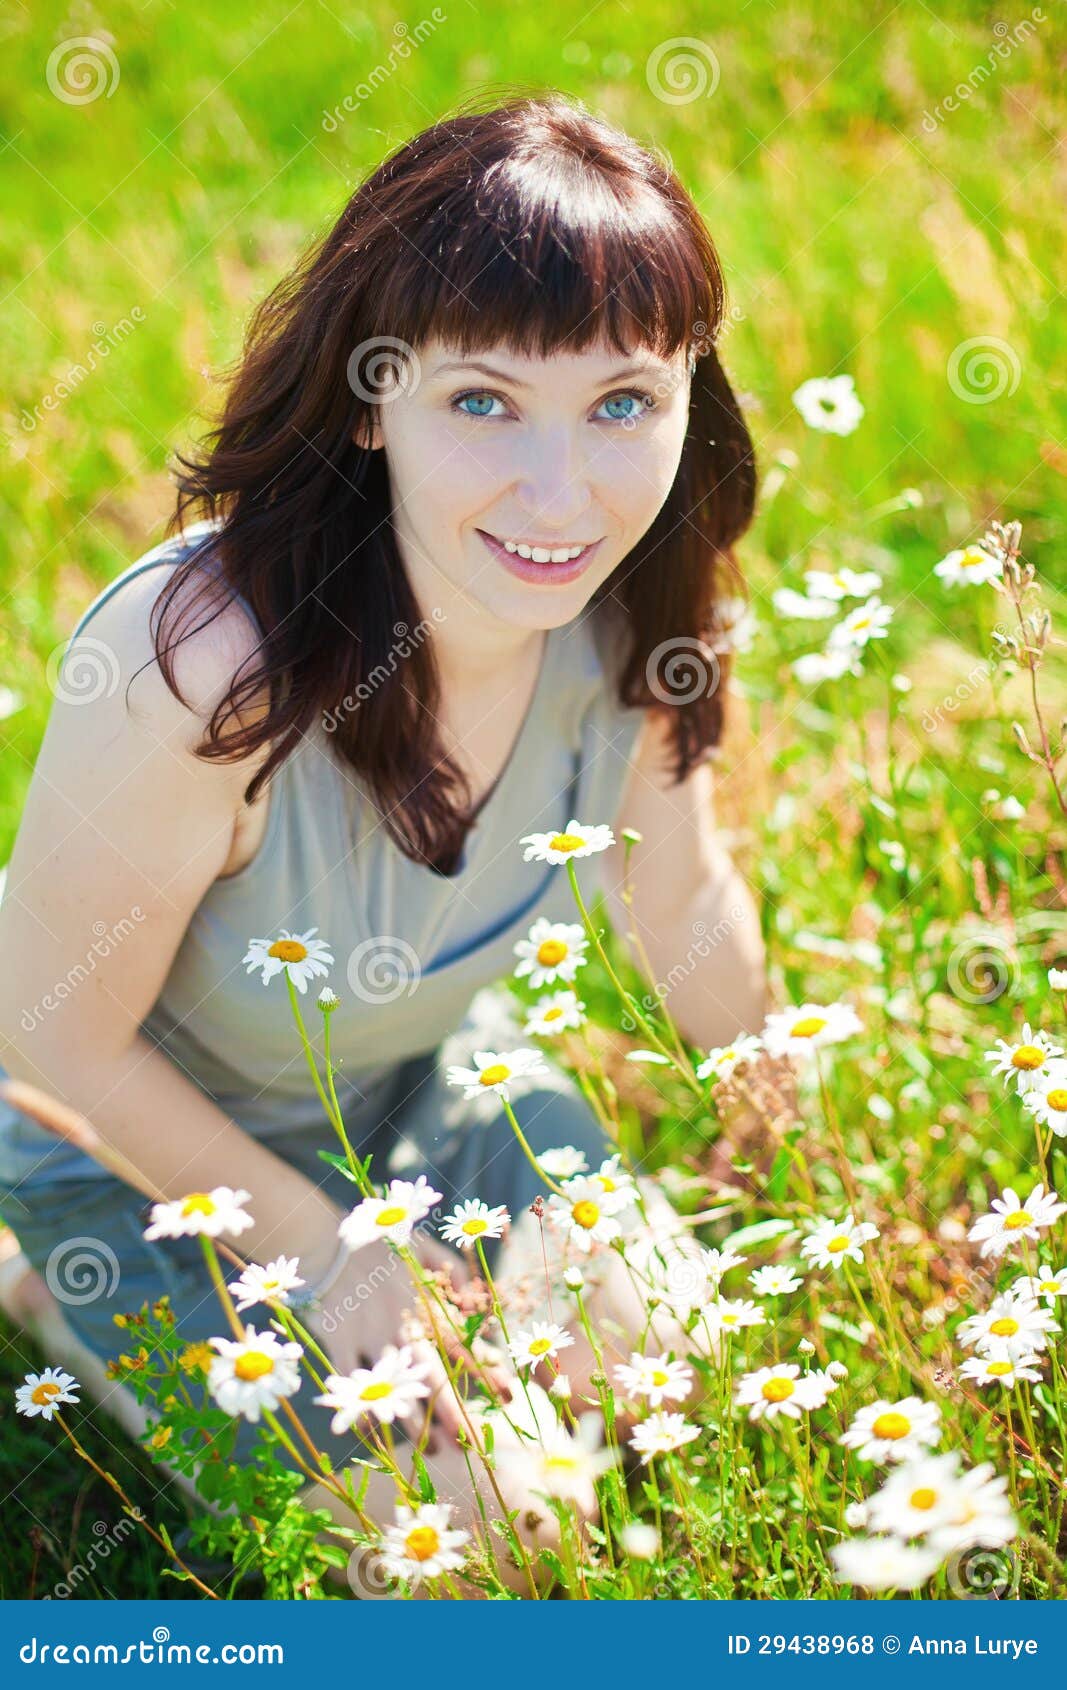 Woman and Camomiles stock photo. Image of portrait, camomiles - 29438968